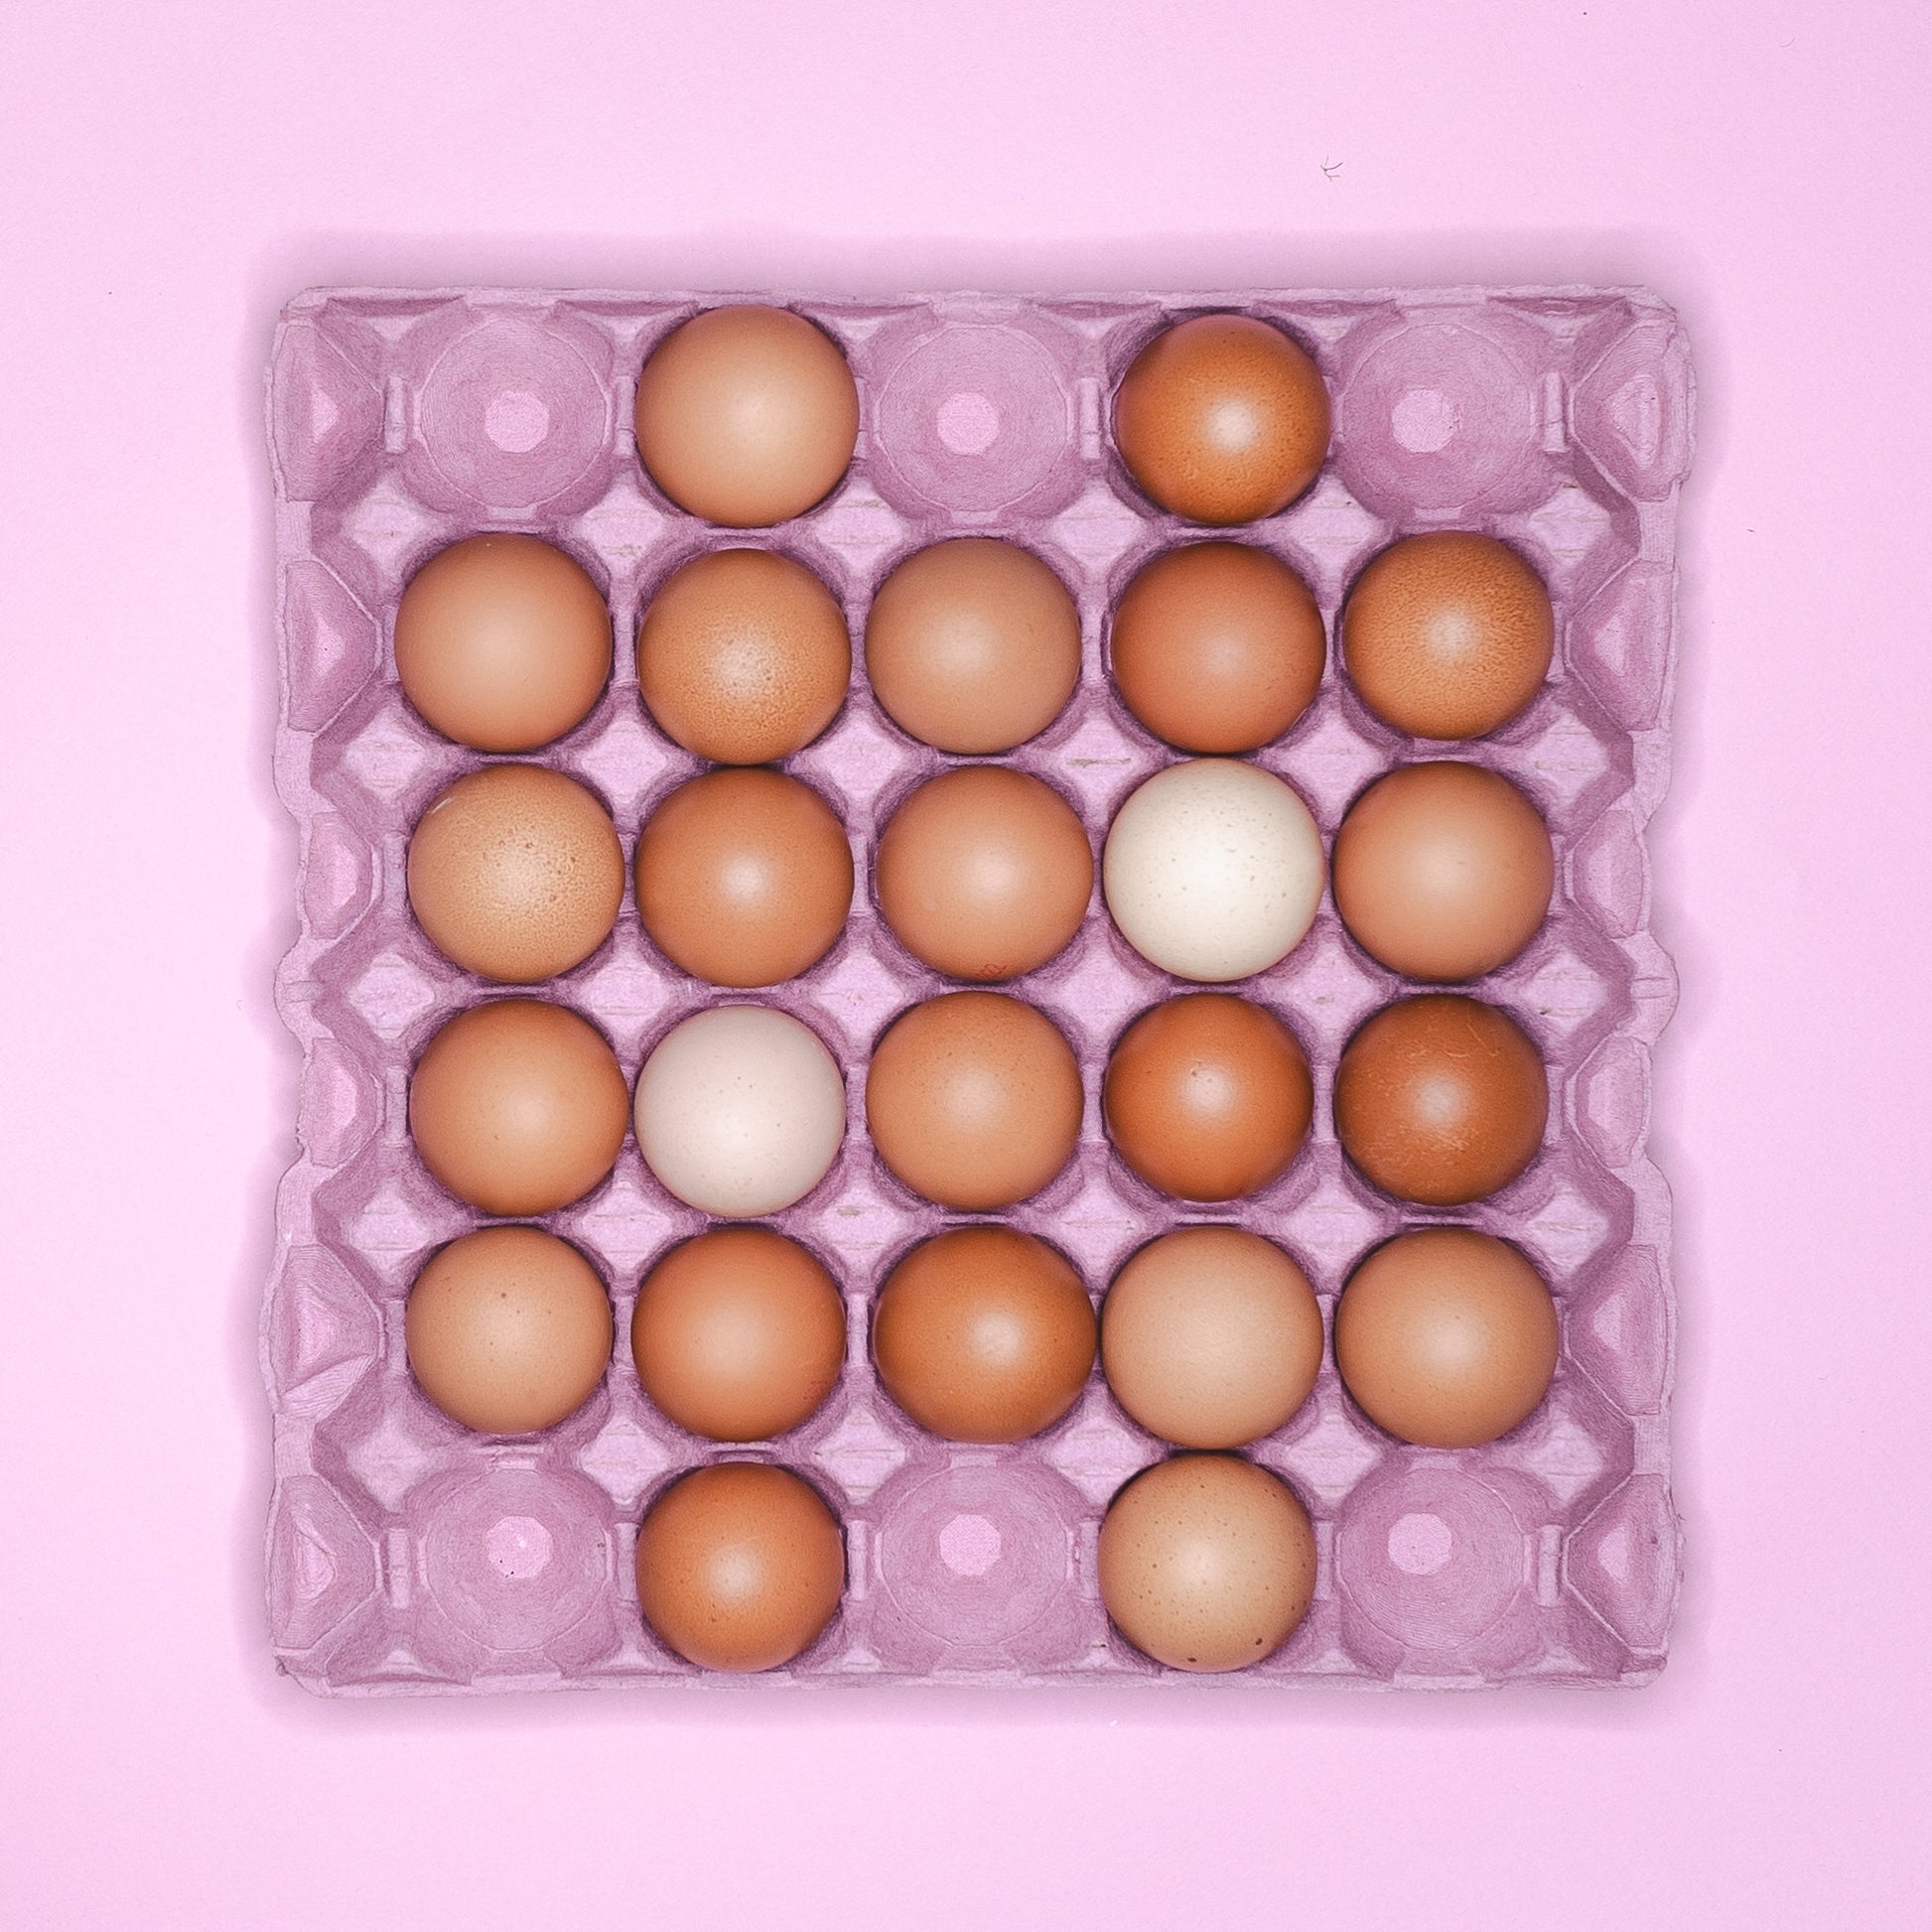 A pink cardboard tray holding 24 eggs